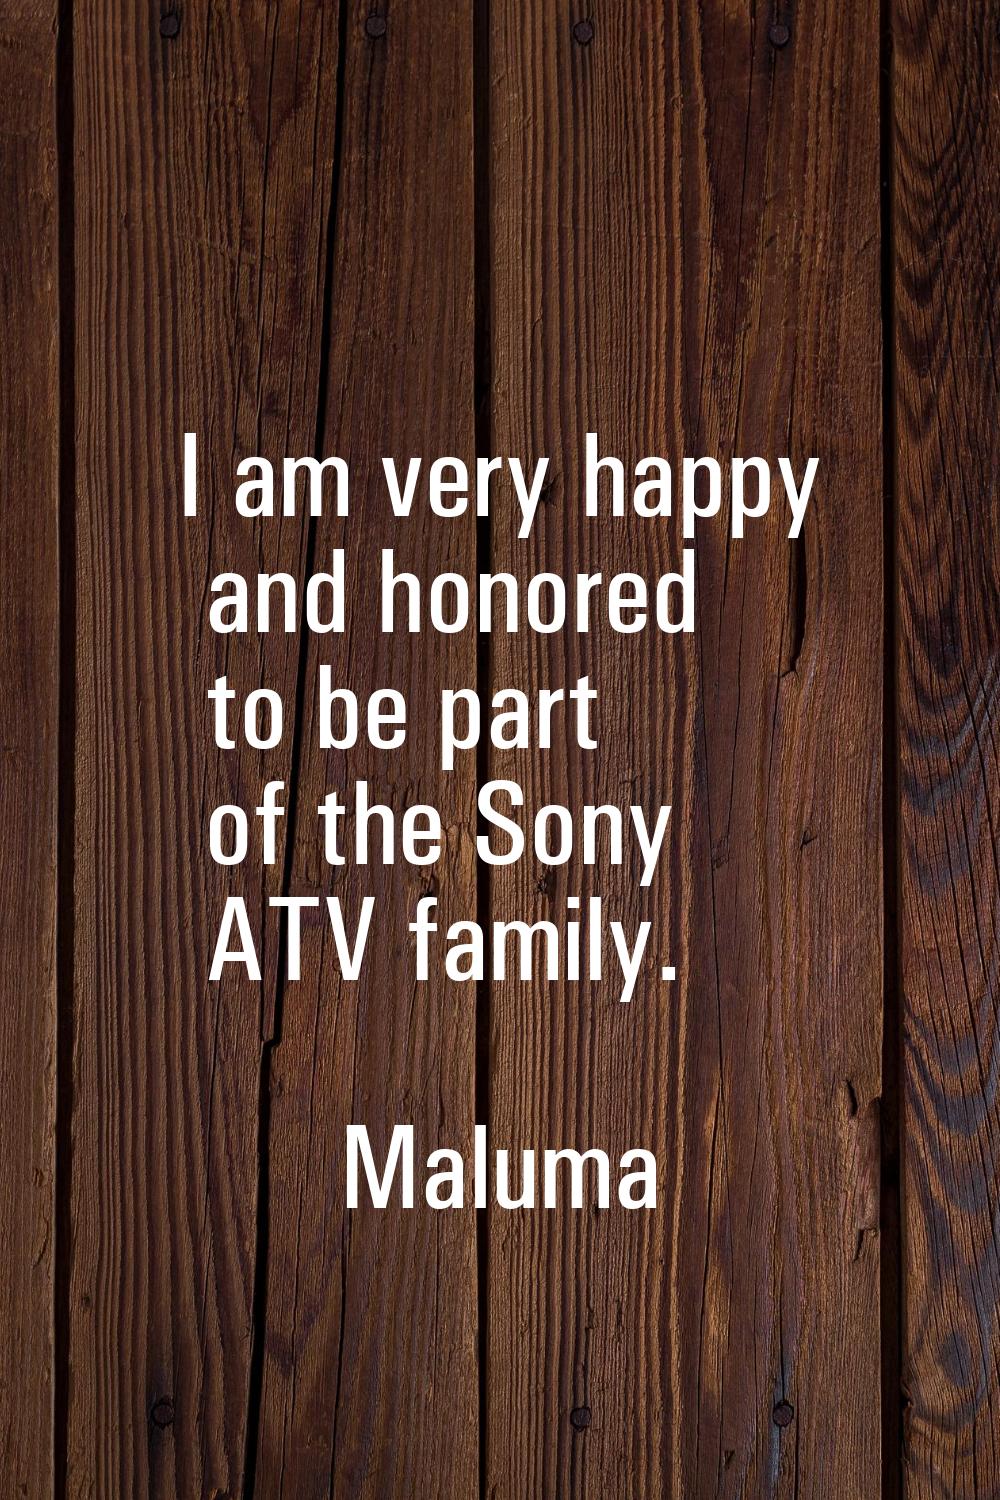 I am very happy and honored to be part of the Sony ATV family.